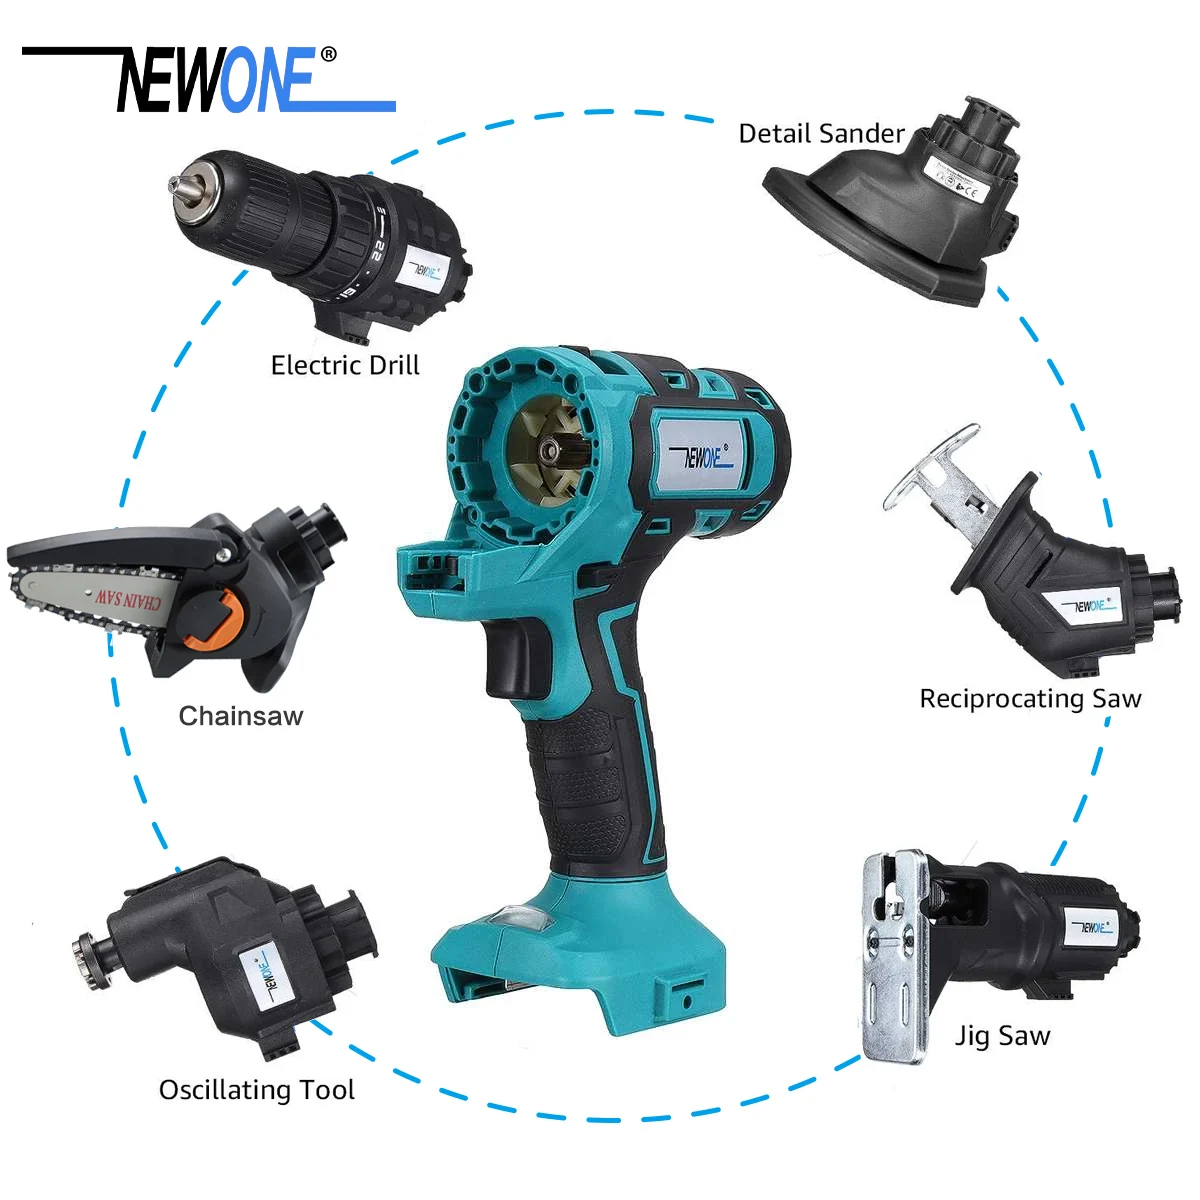 6-in-1Multi Power Tool Electric Drill Reciprocating Saw Oscillating Tool Jig Saw Sander Combo Kit Replaceable Head For Makita